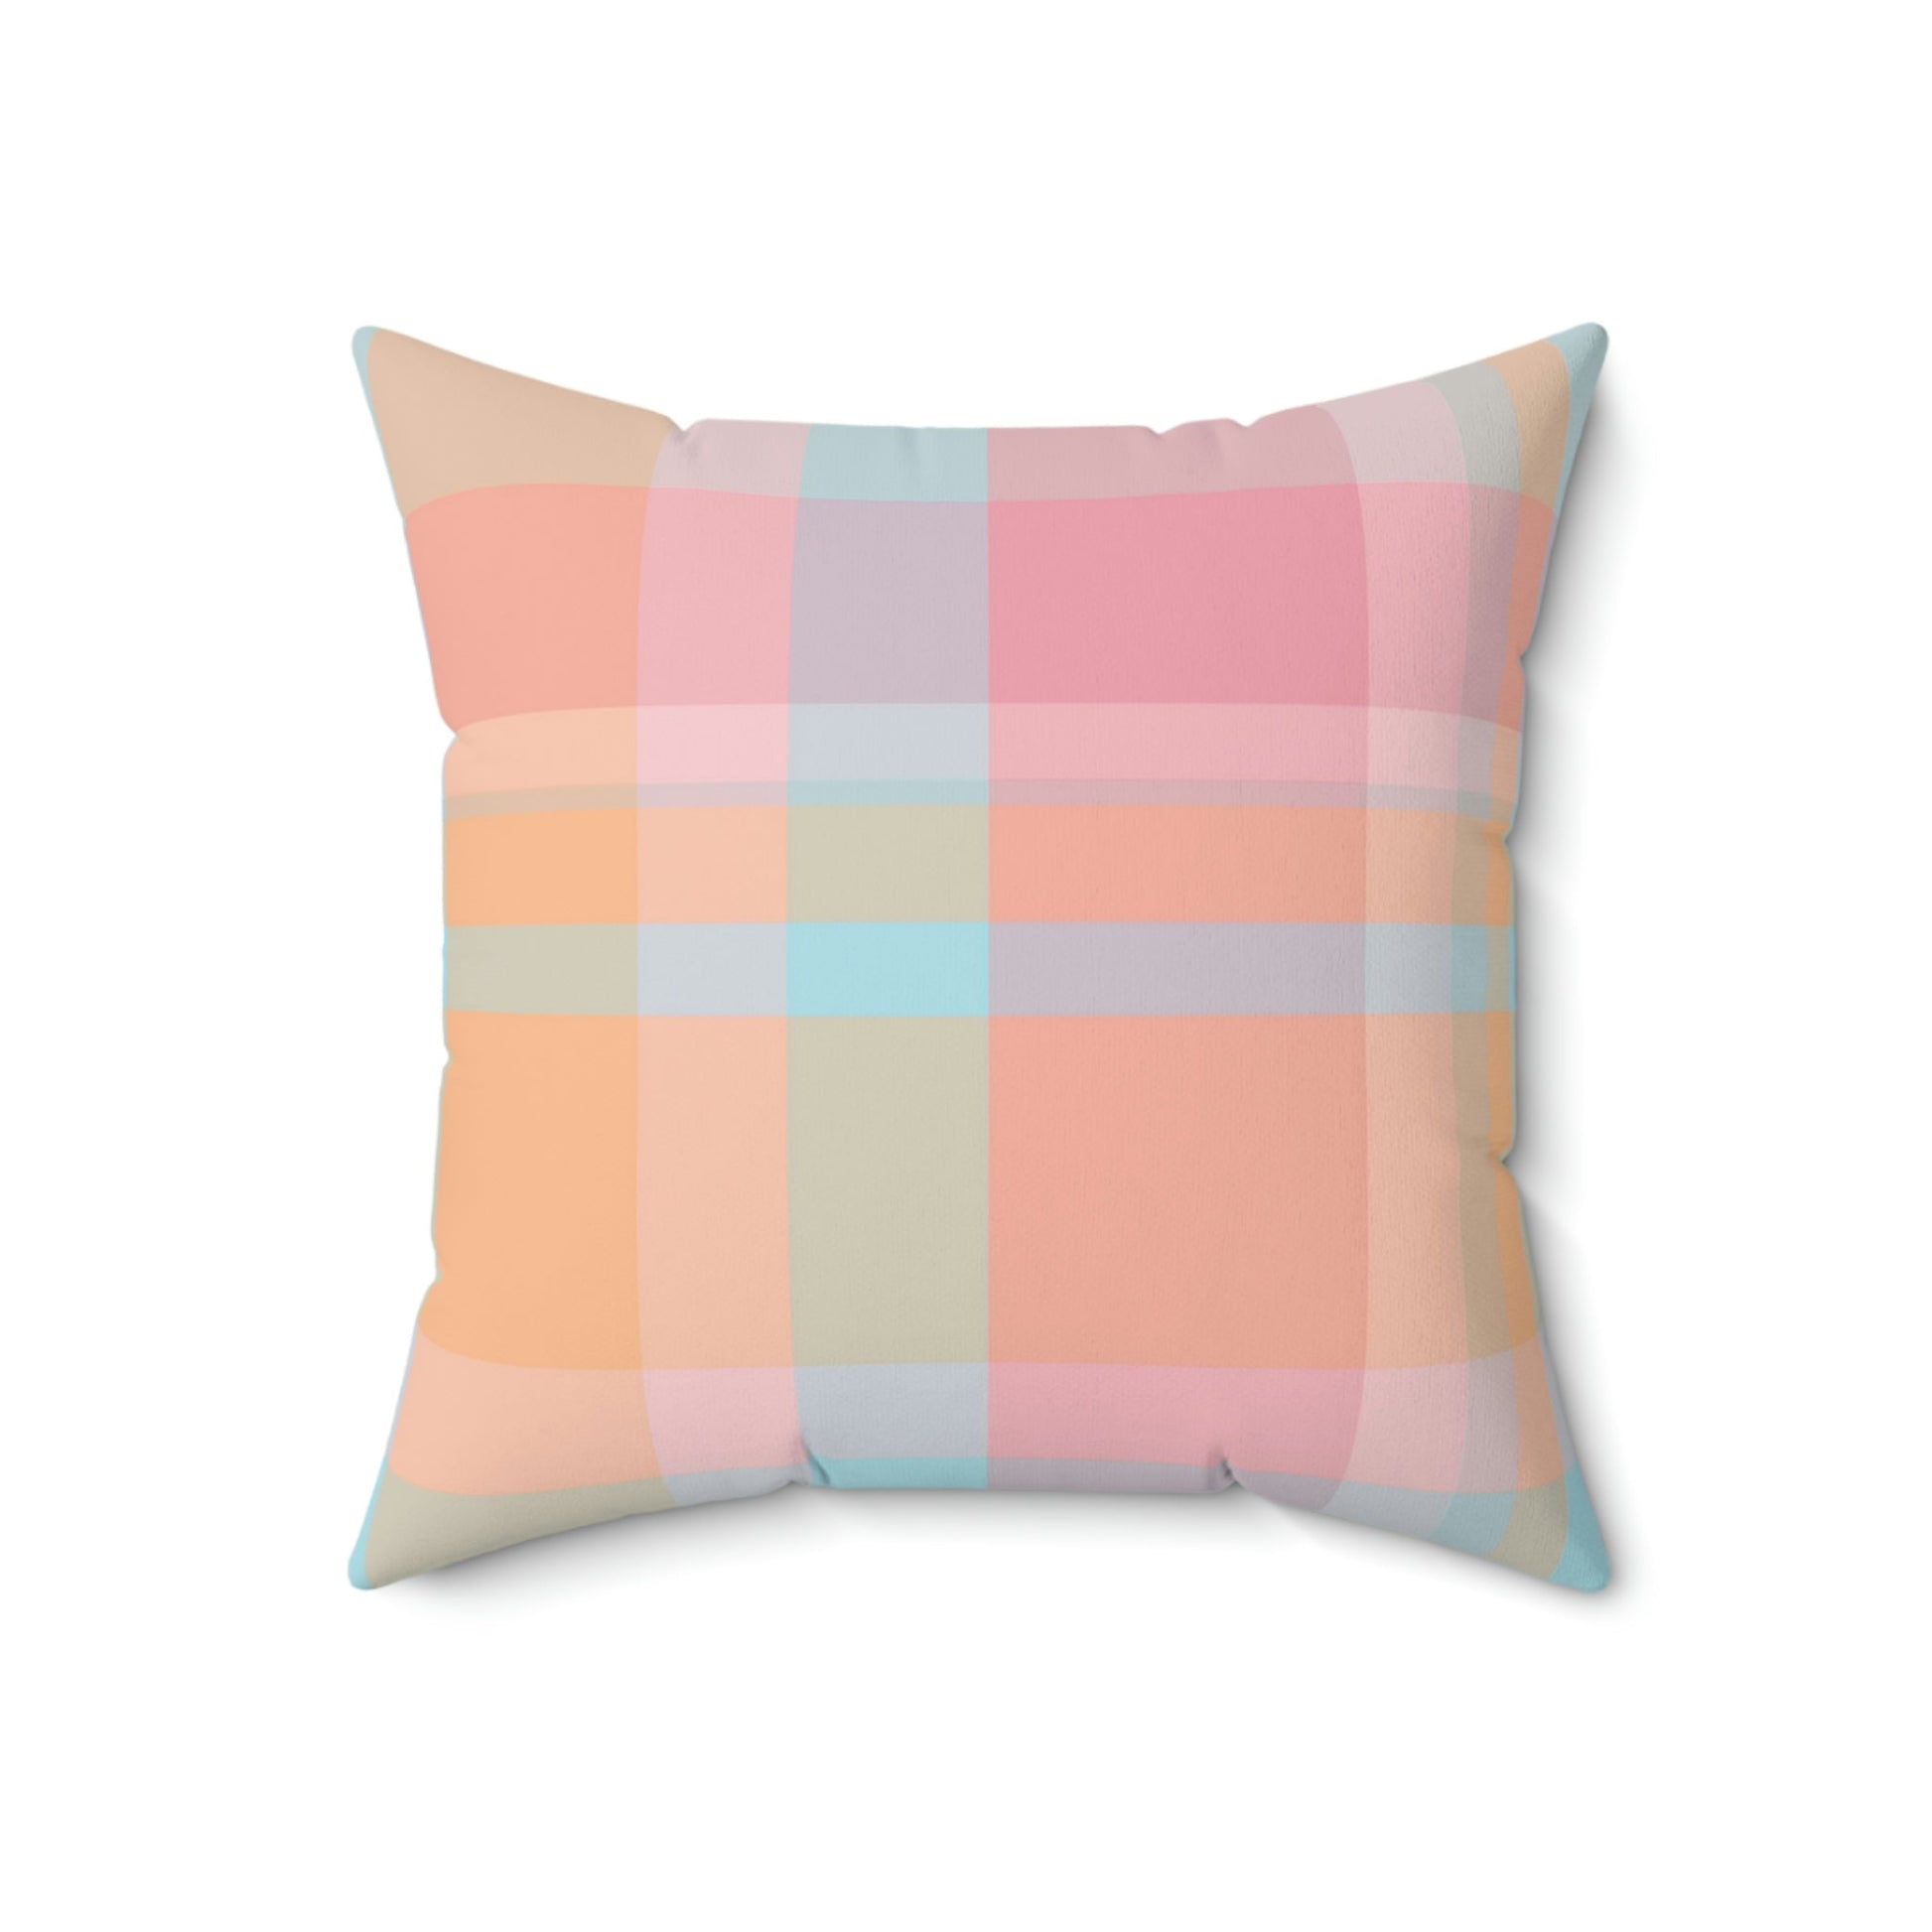 Spring Pastel Plaid Square Pillow Home Decor Pink Sweetheart